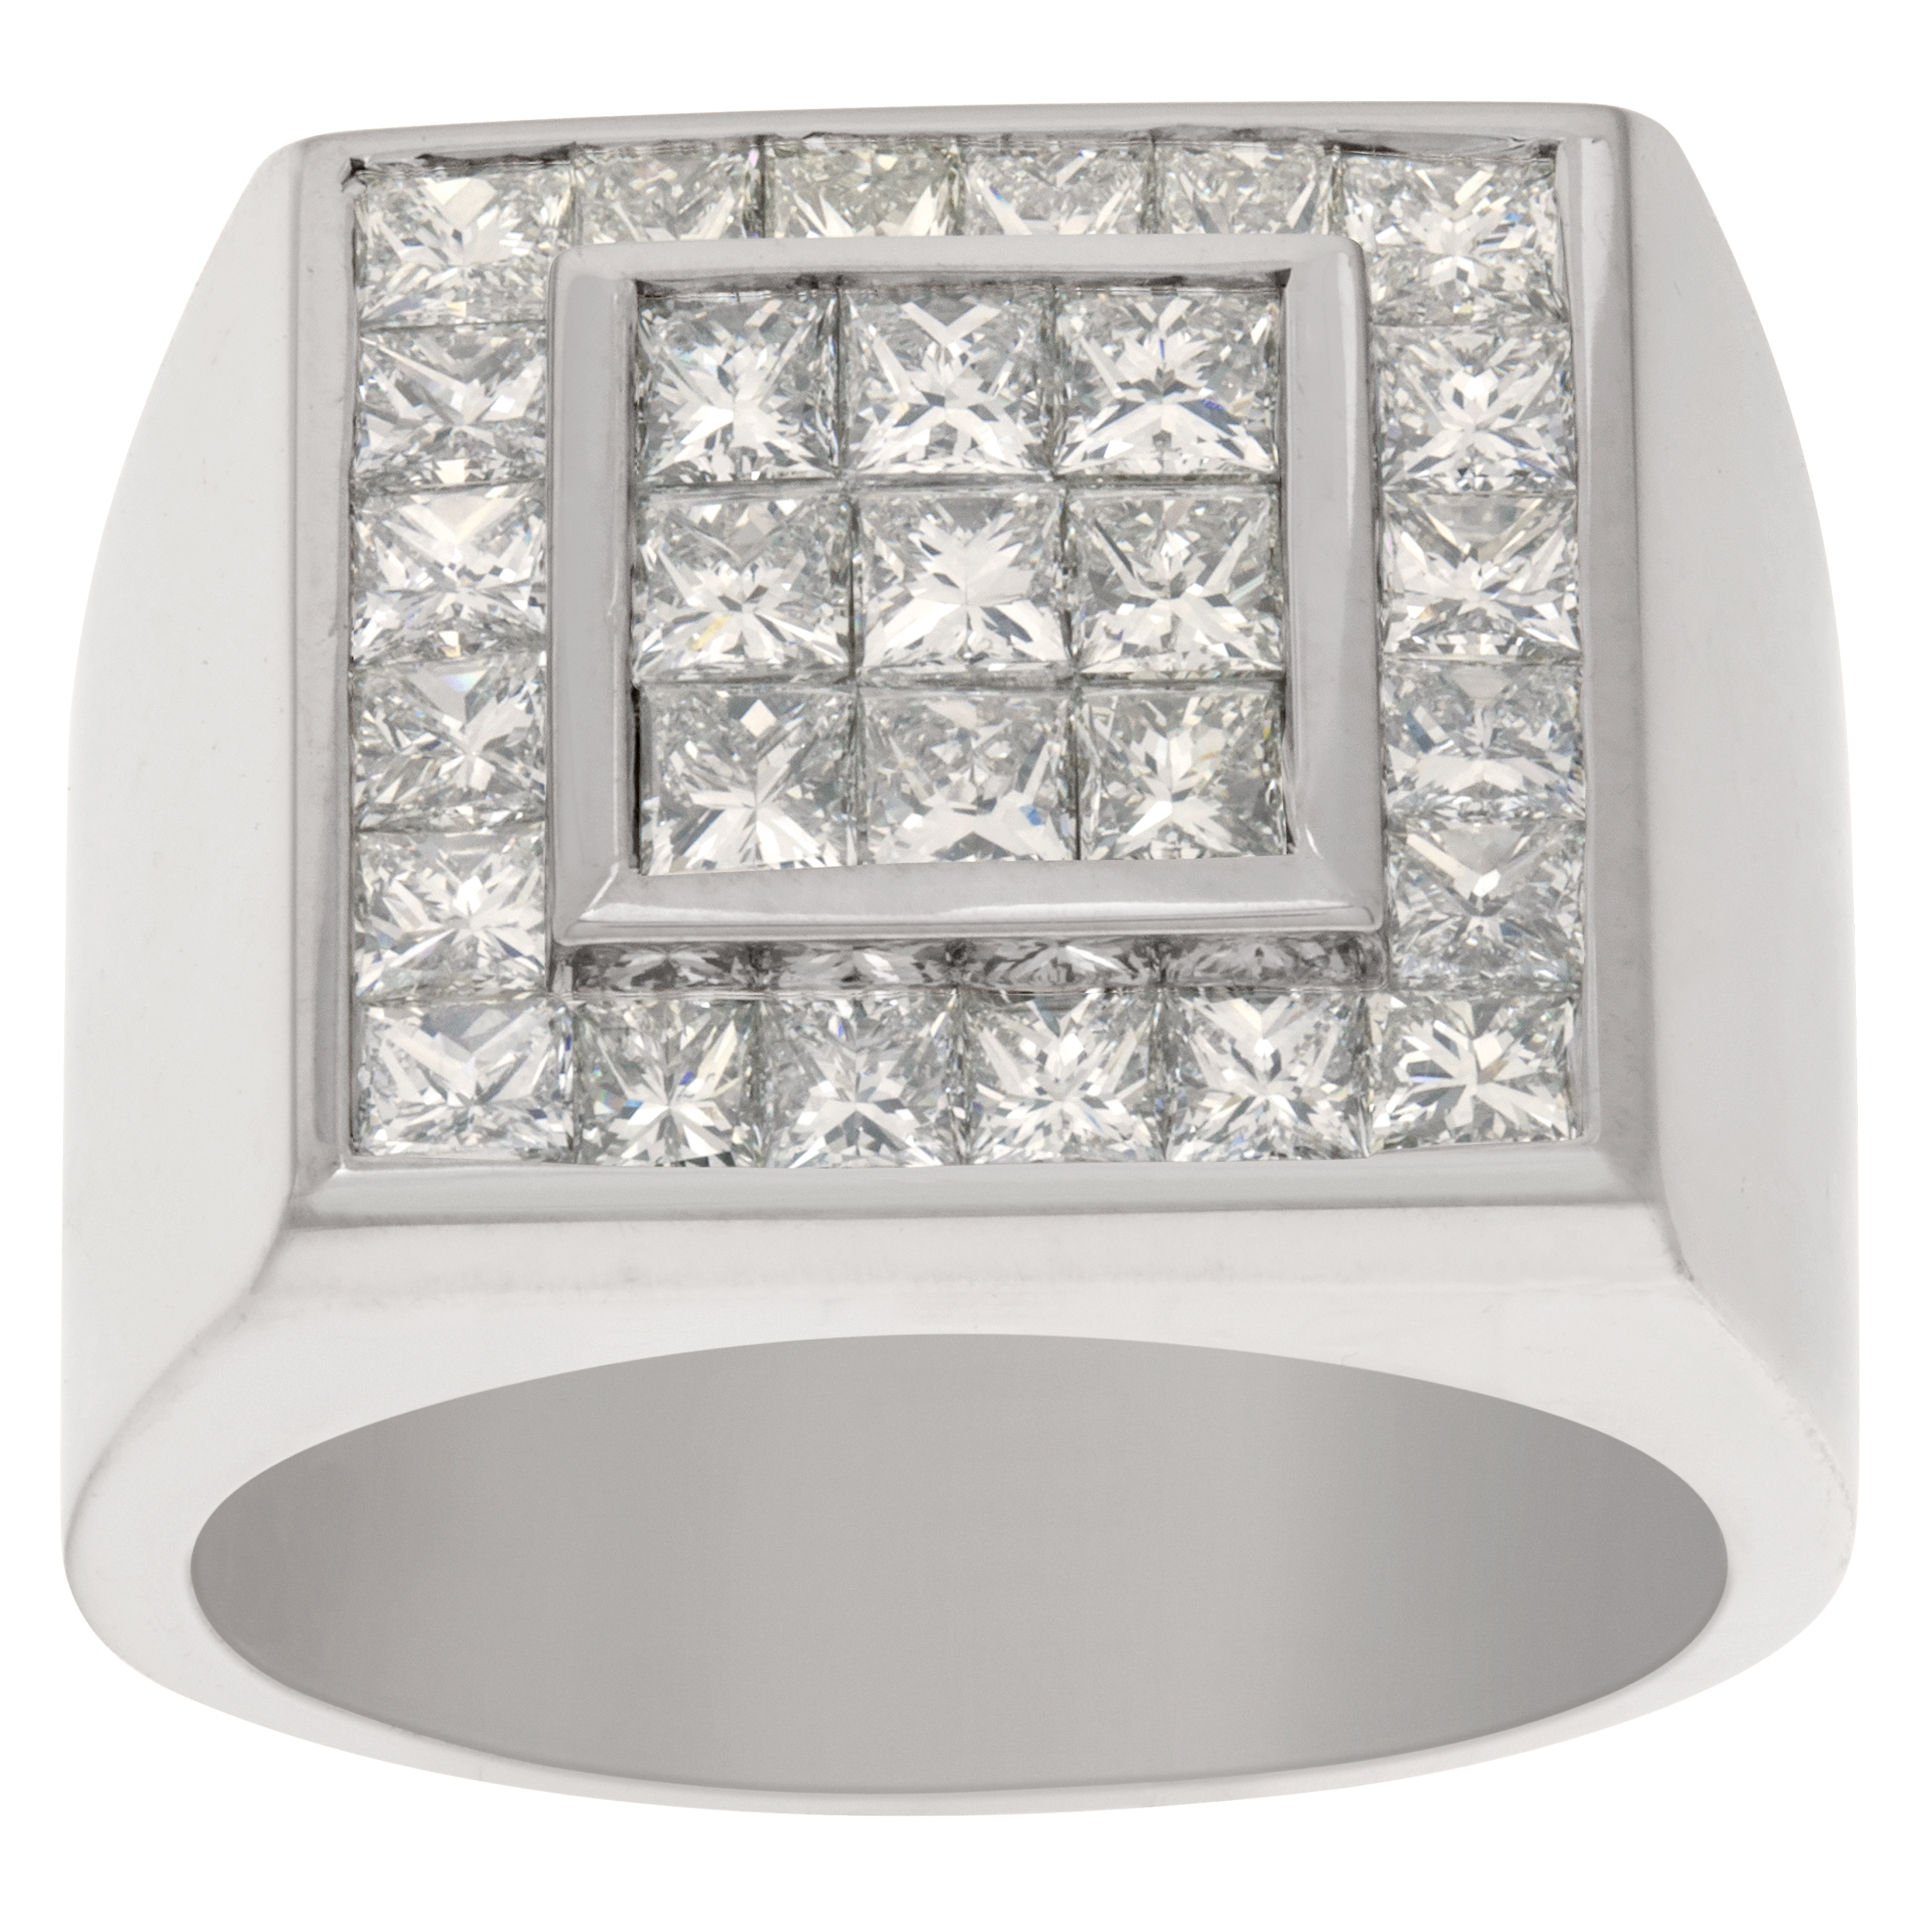 Men's 18k white gold princess cut chanel set ring with 4.1 carats in diamonds